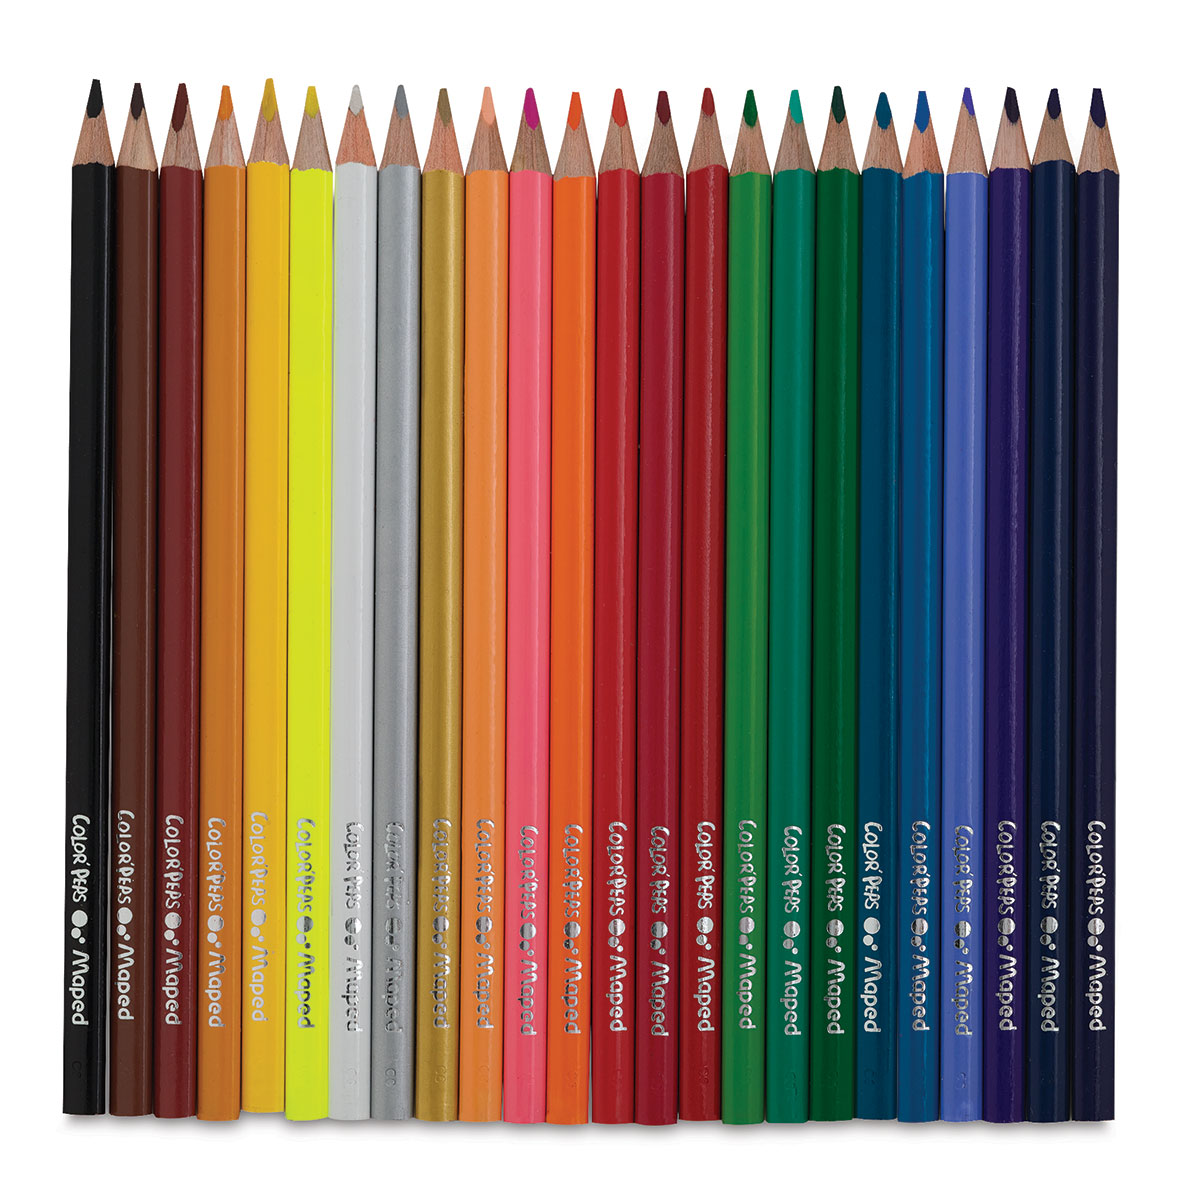 Maped Color Pep'S Twist Crayons- 24 Shades – Itsy Bitsy